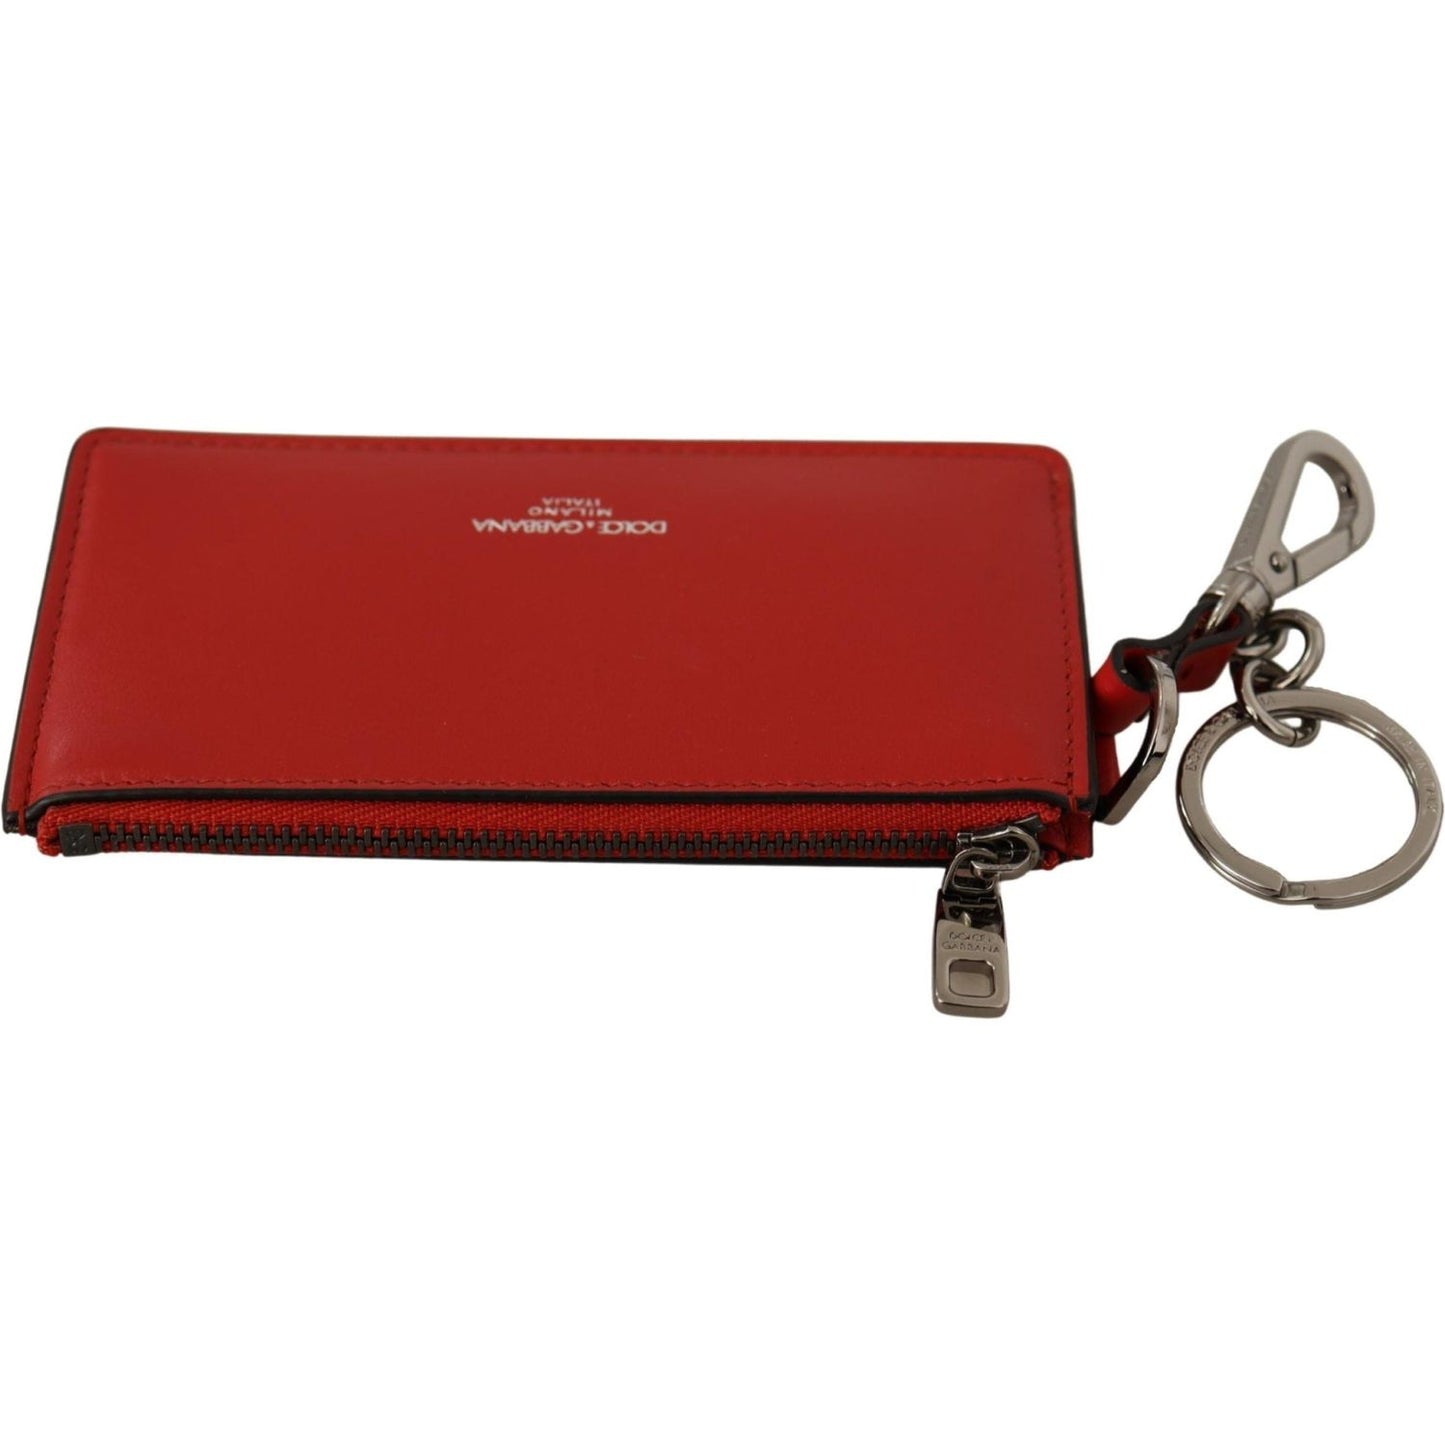 Dolce & Gabbana Elegant Leather Keychain in Vibrant Red red-leather-purse-silver-tone-keychain IMG_7541-scaled-0d827eb7-2e0.jpg